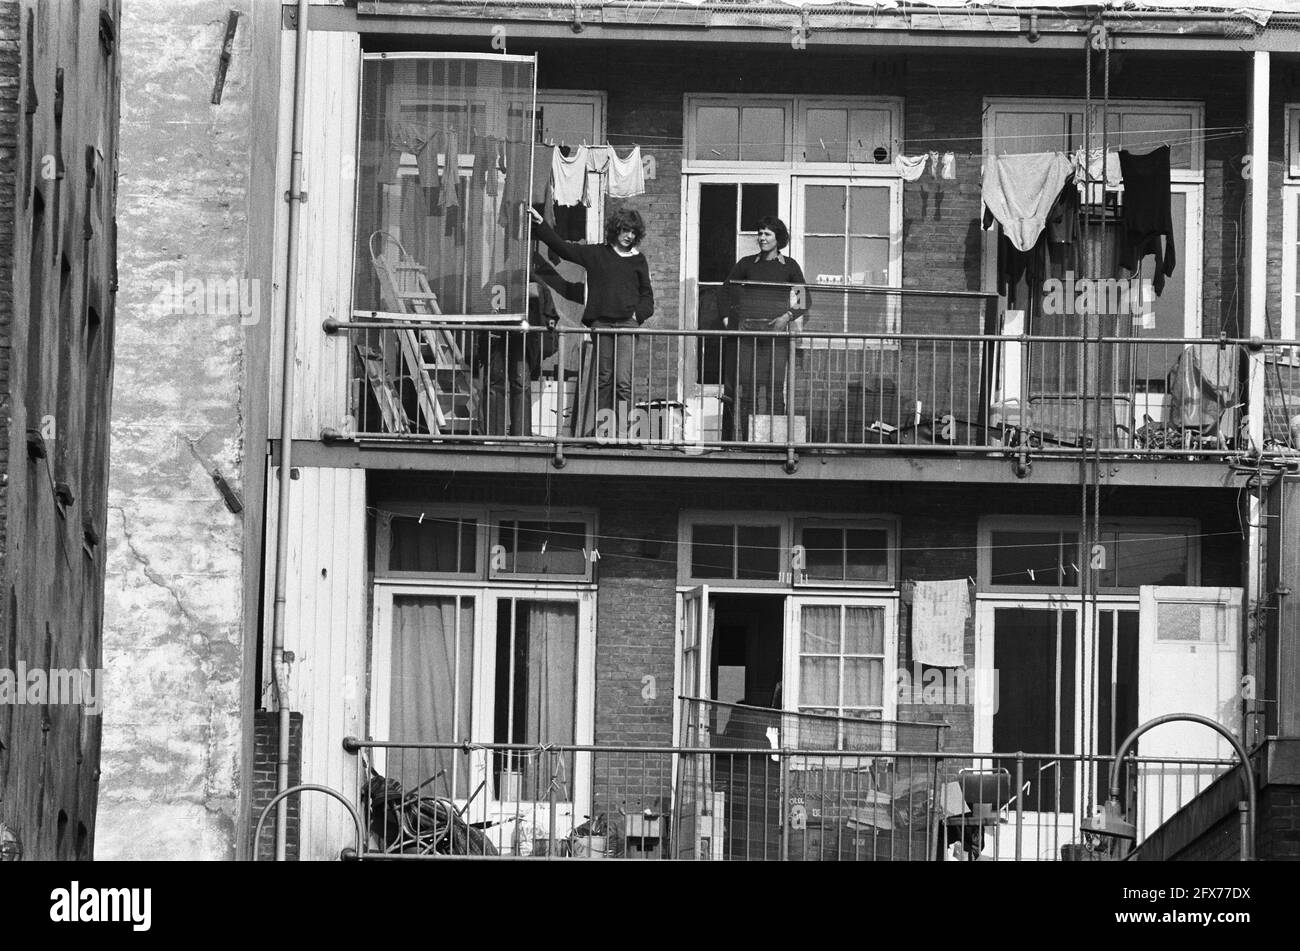 Action groups and residents Lastageweg (Nieuwmarktbuurt) prepare for demolition; barricading of windows, April 7, 1975, ACTION GROUPS, residents, demolition, The Netherlands, 20th century press agency photo, news to remember, documentary, historic photography 1945-1990, visual stories, human history of the Twentieth Century, capturing moments in time Stock Photo